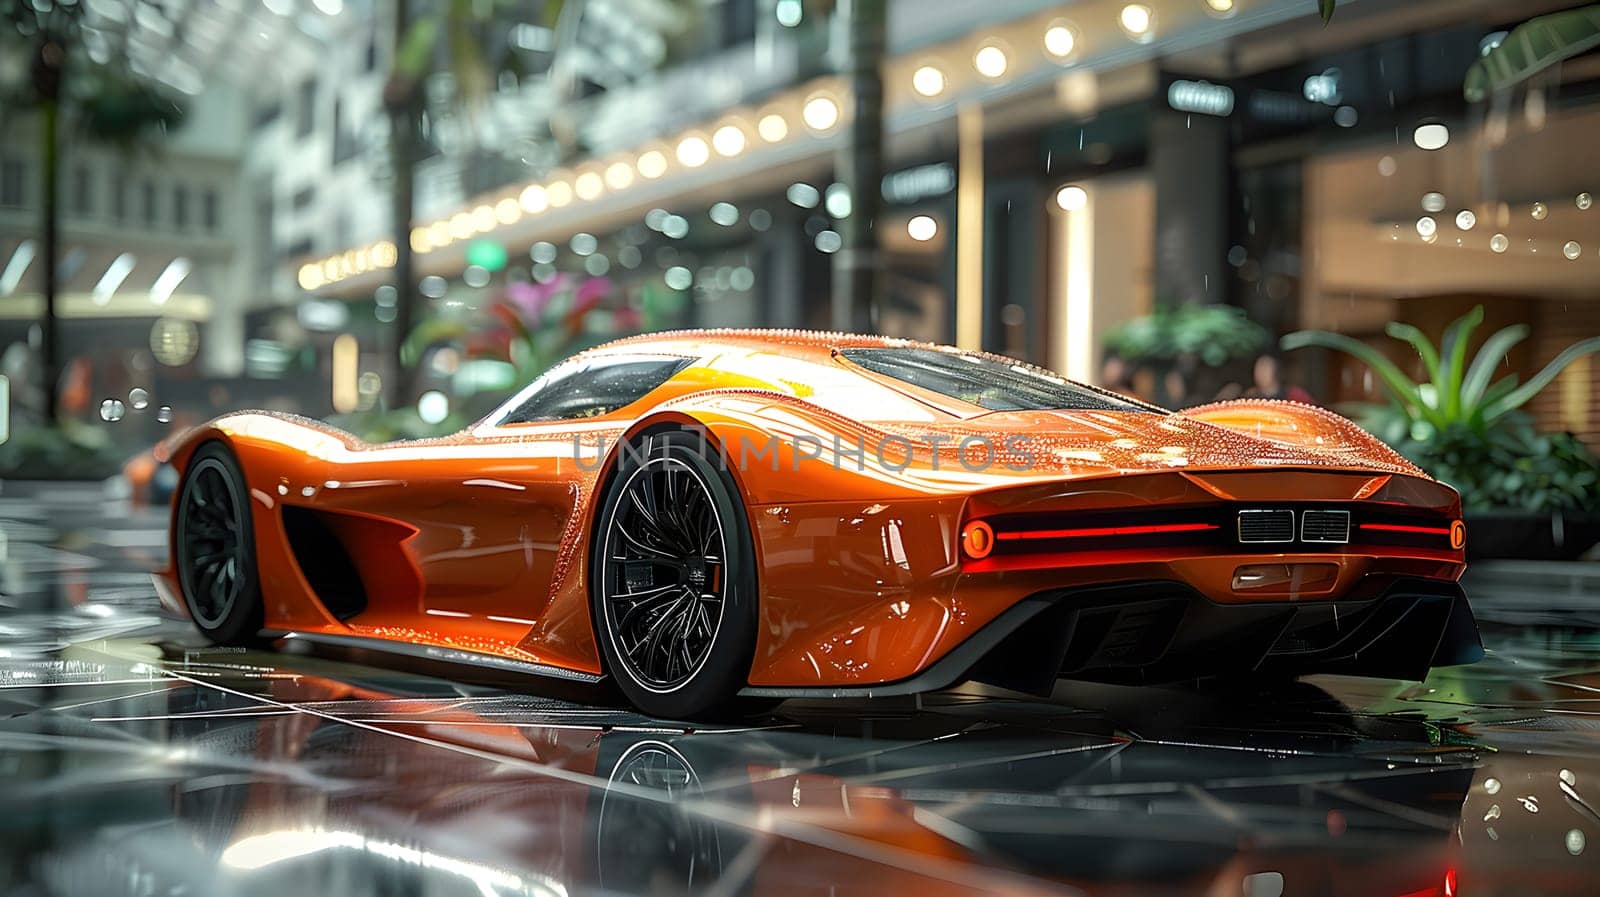 Orange sports car parked in rain in front of building by Nadtochiy